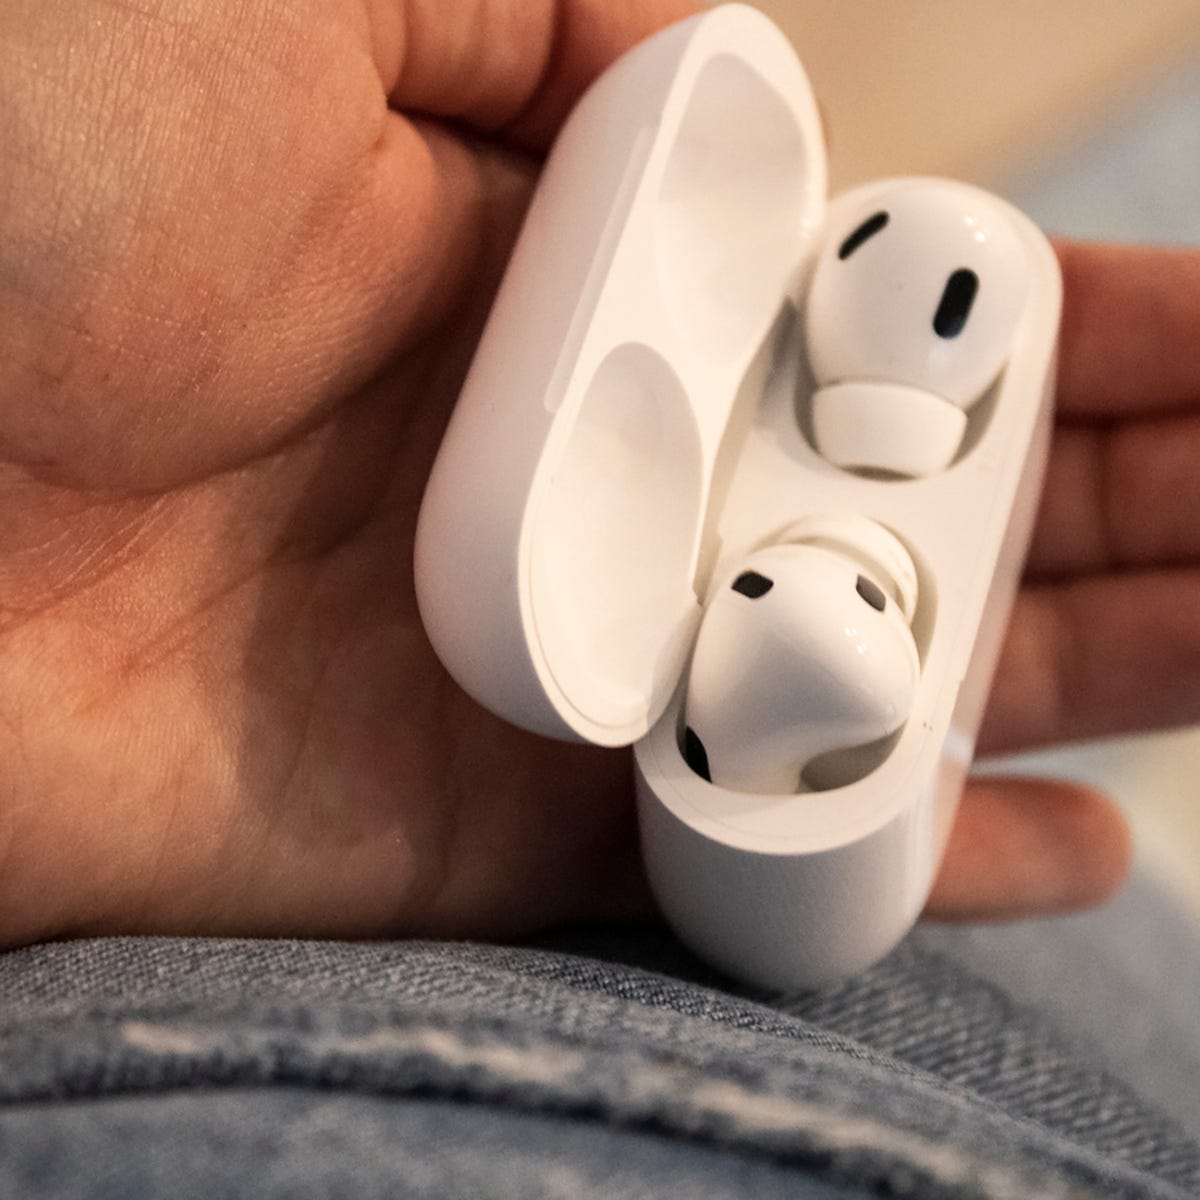 Apple AirPods Pro (2nd Gen) review: Two major upgrades, tamed by one familiar flaw ZDNET